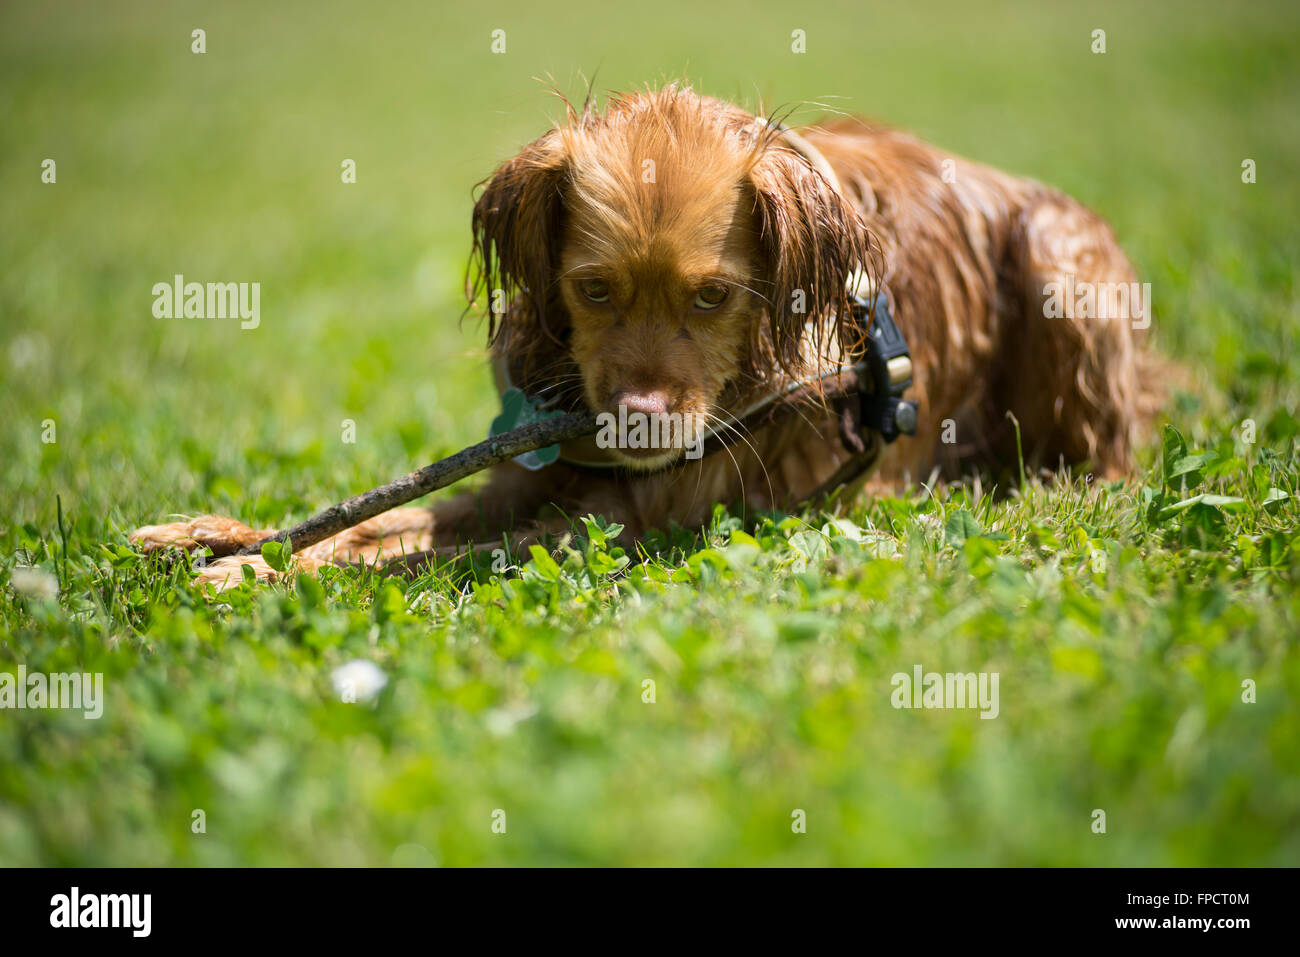 A wet, brown spaniel mixed breed dog nibbling on wooden stick  in the sun on a green lawn Stock Photo